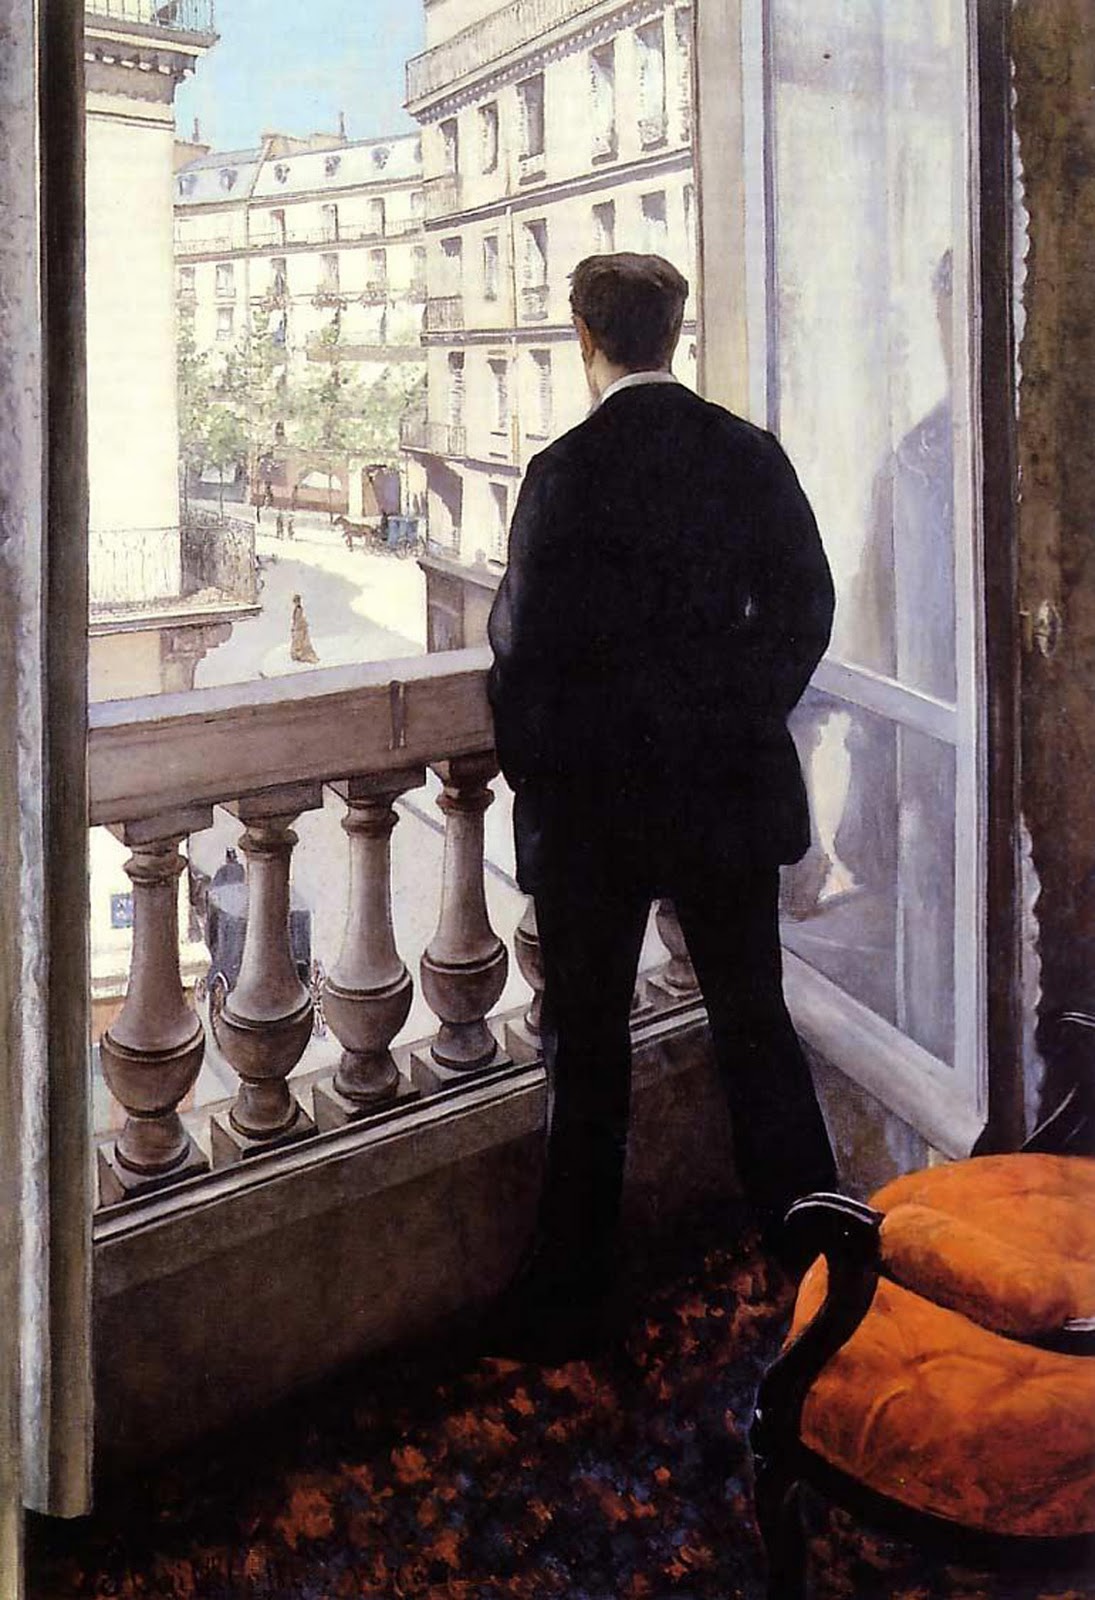 Young Man at his Window by Gustave Caillebotte - 1875 - 117 cm × 82 cm private collection